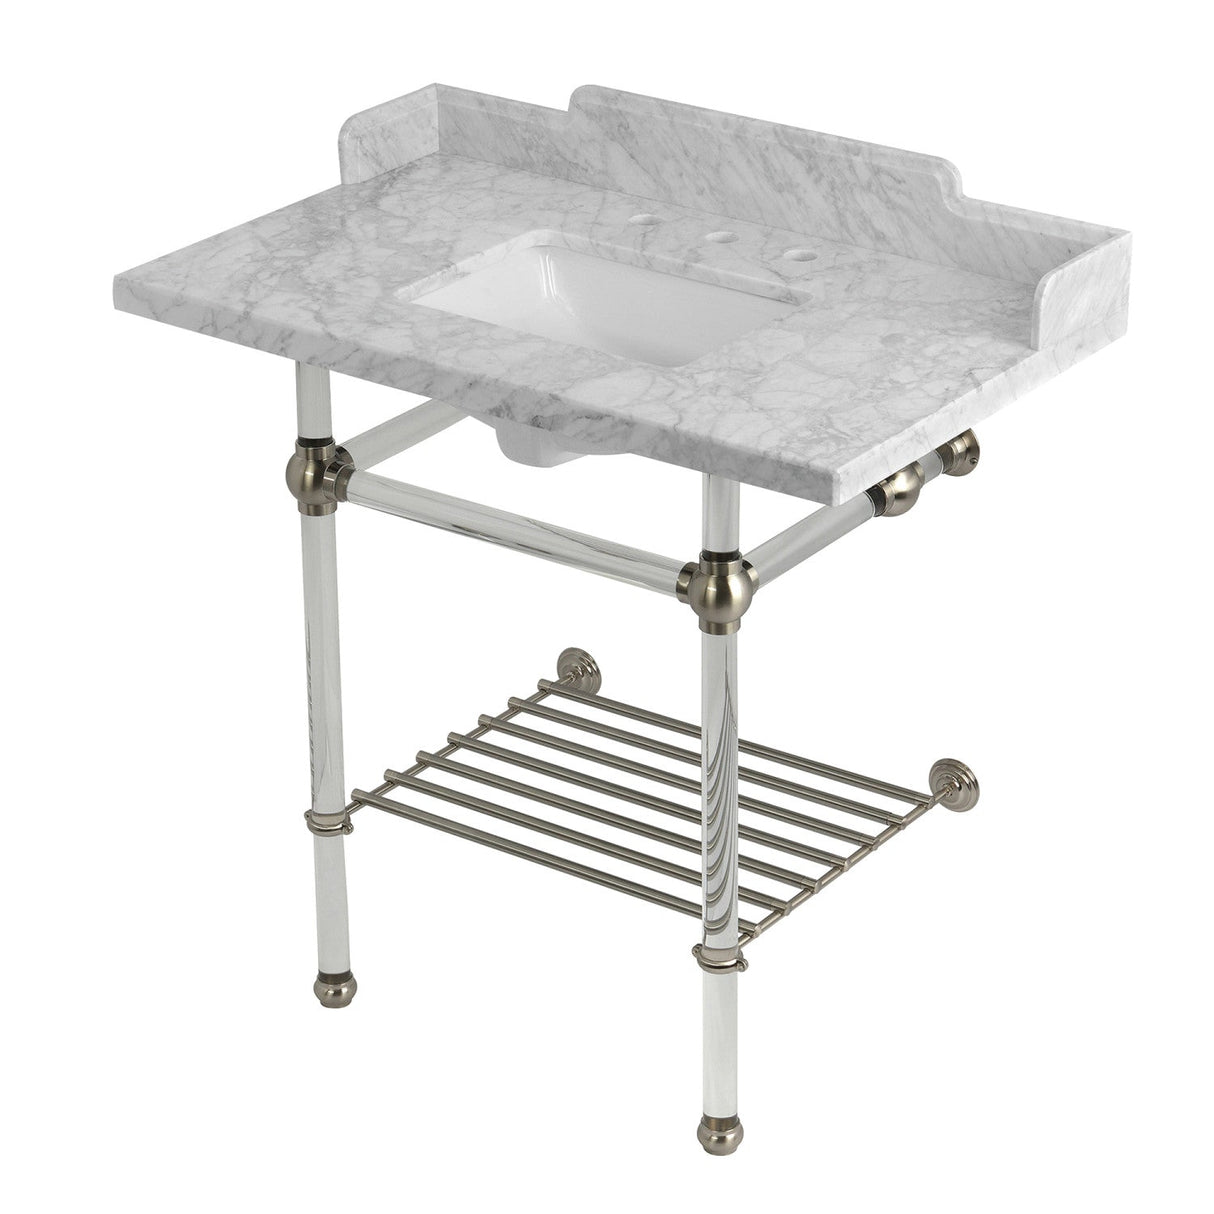 Pemberton LMS36MASQB8 36-Inch Console Sink with Acrylic Legs (8-Inch, 3 Hole), Marble White/Brushed Nickel